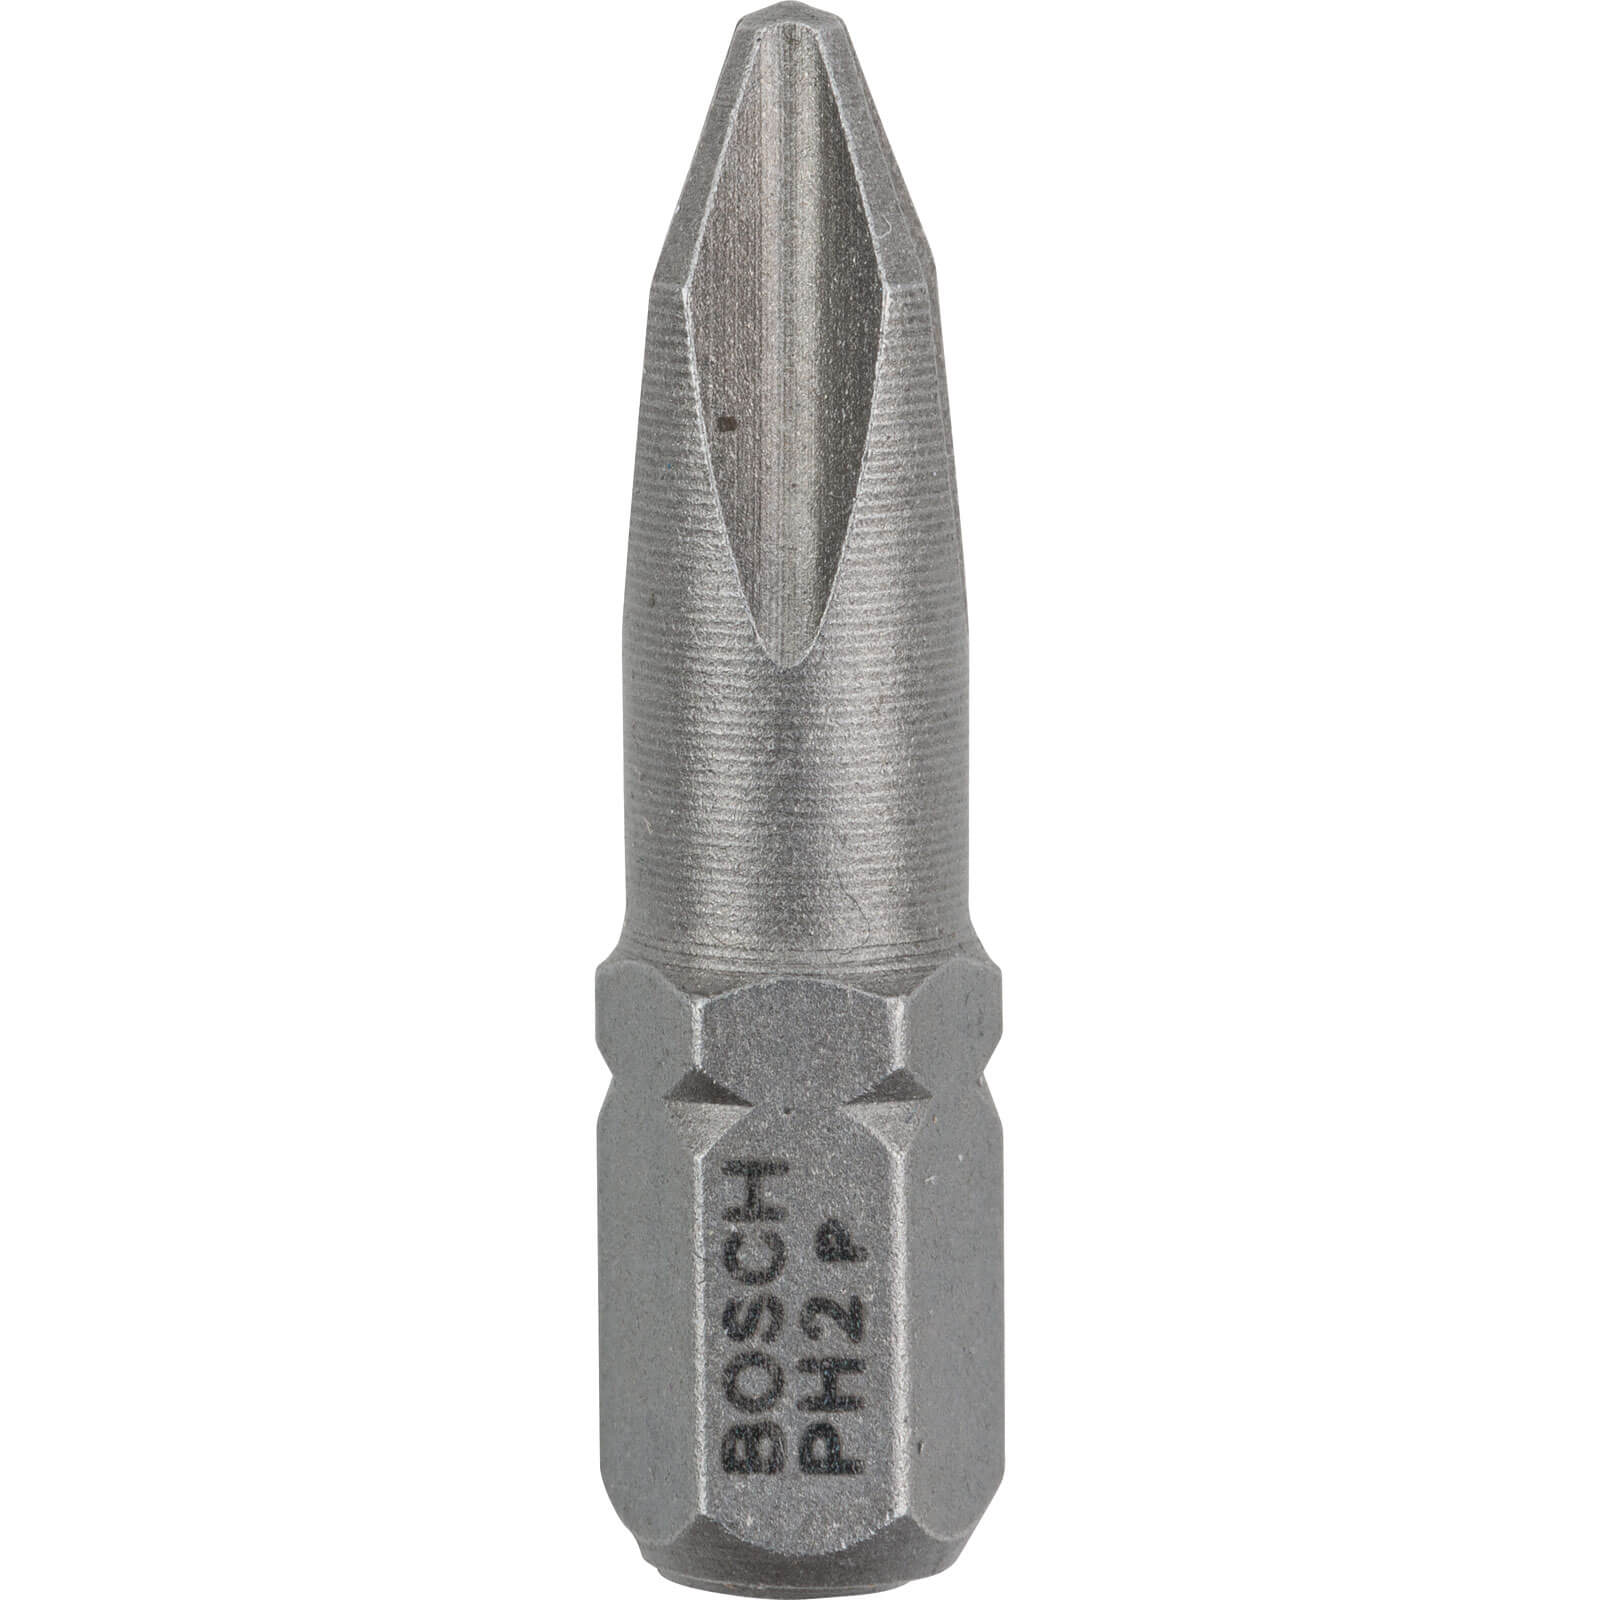 Image of Bosch Extra Hard Phillips Screwdriver Bits PH2 25mm Pack of 100